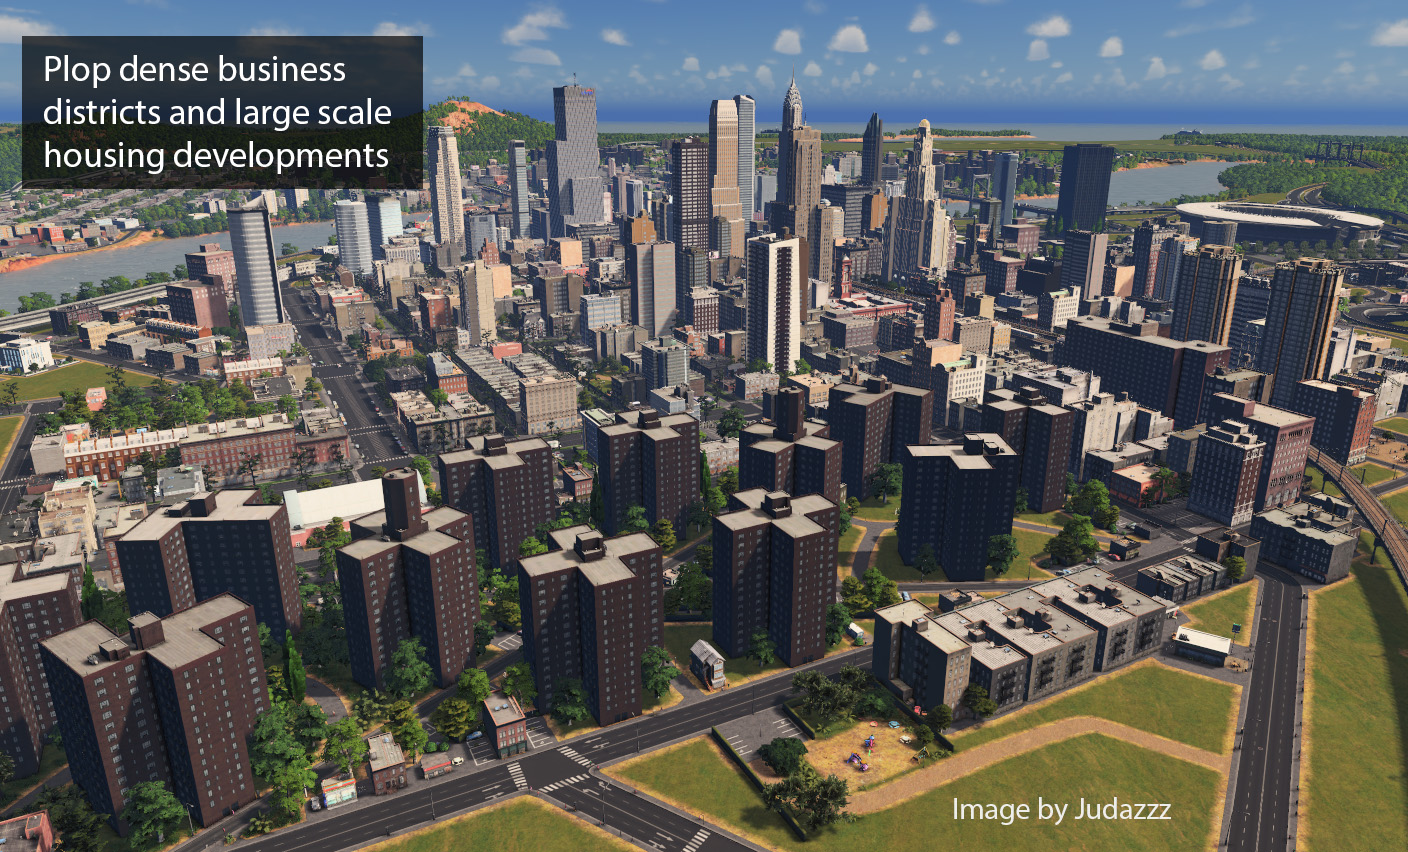 
Screenshot of "Cities: Skylines" with a dense and tall downtown with the caption,
"Plop dense business districts and large scale housing developments.
